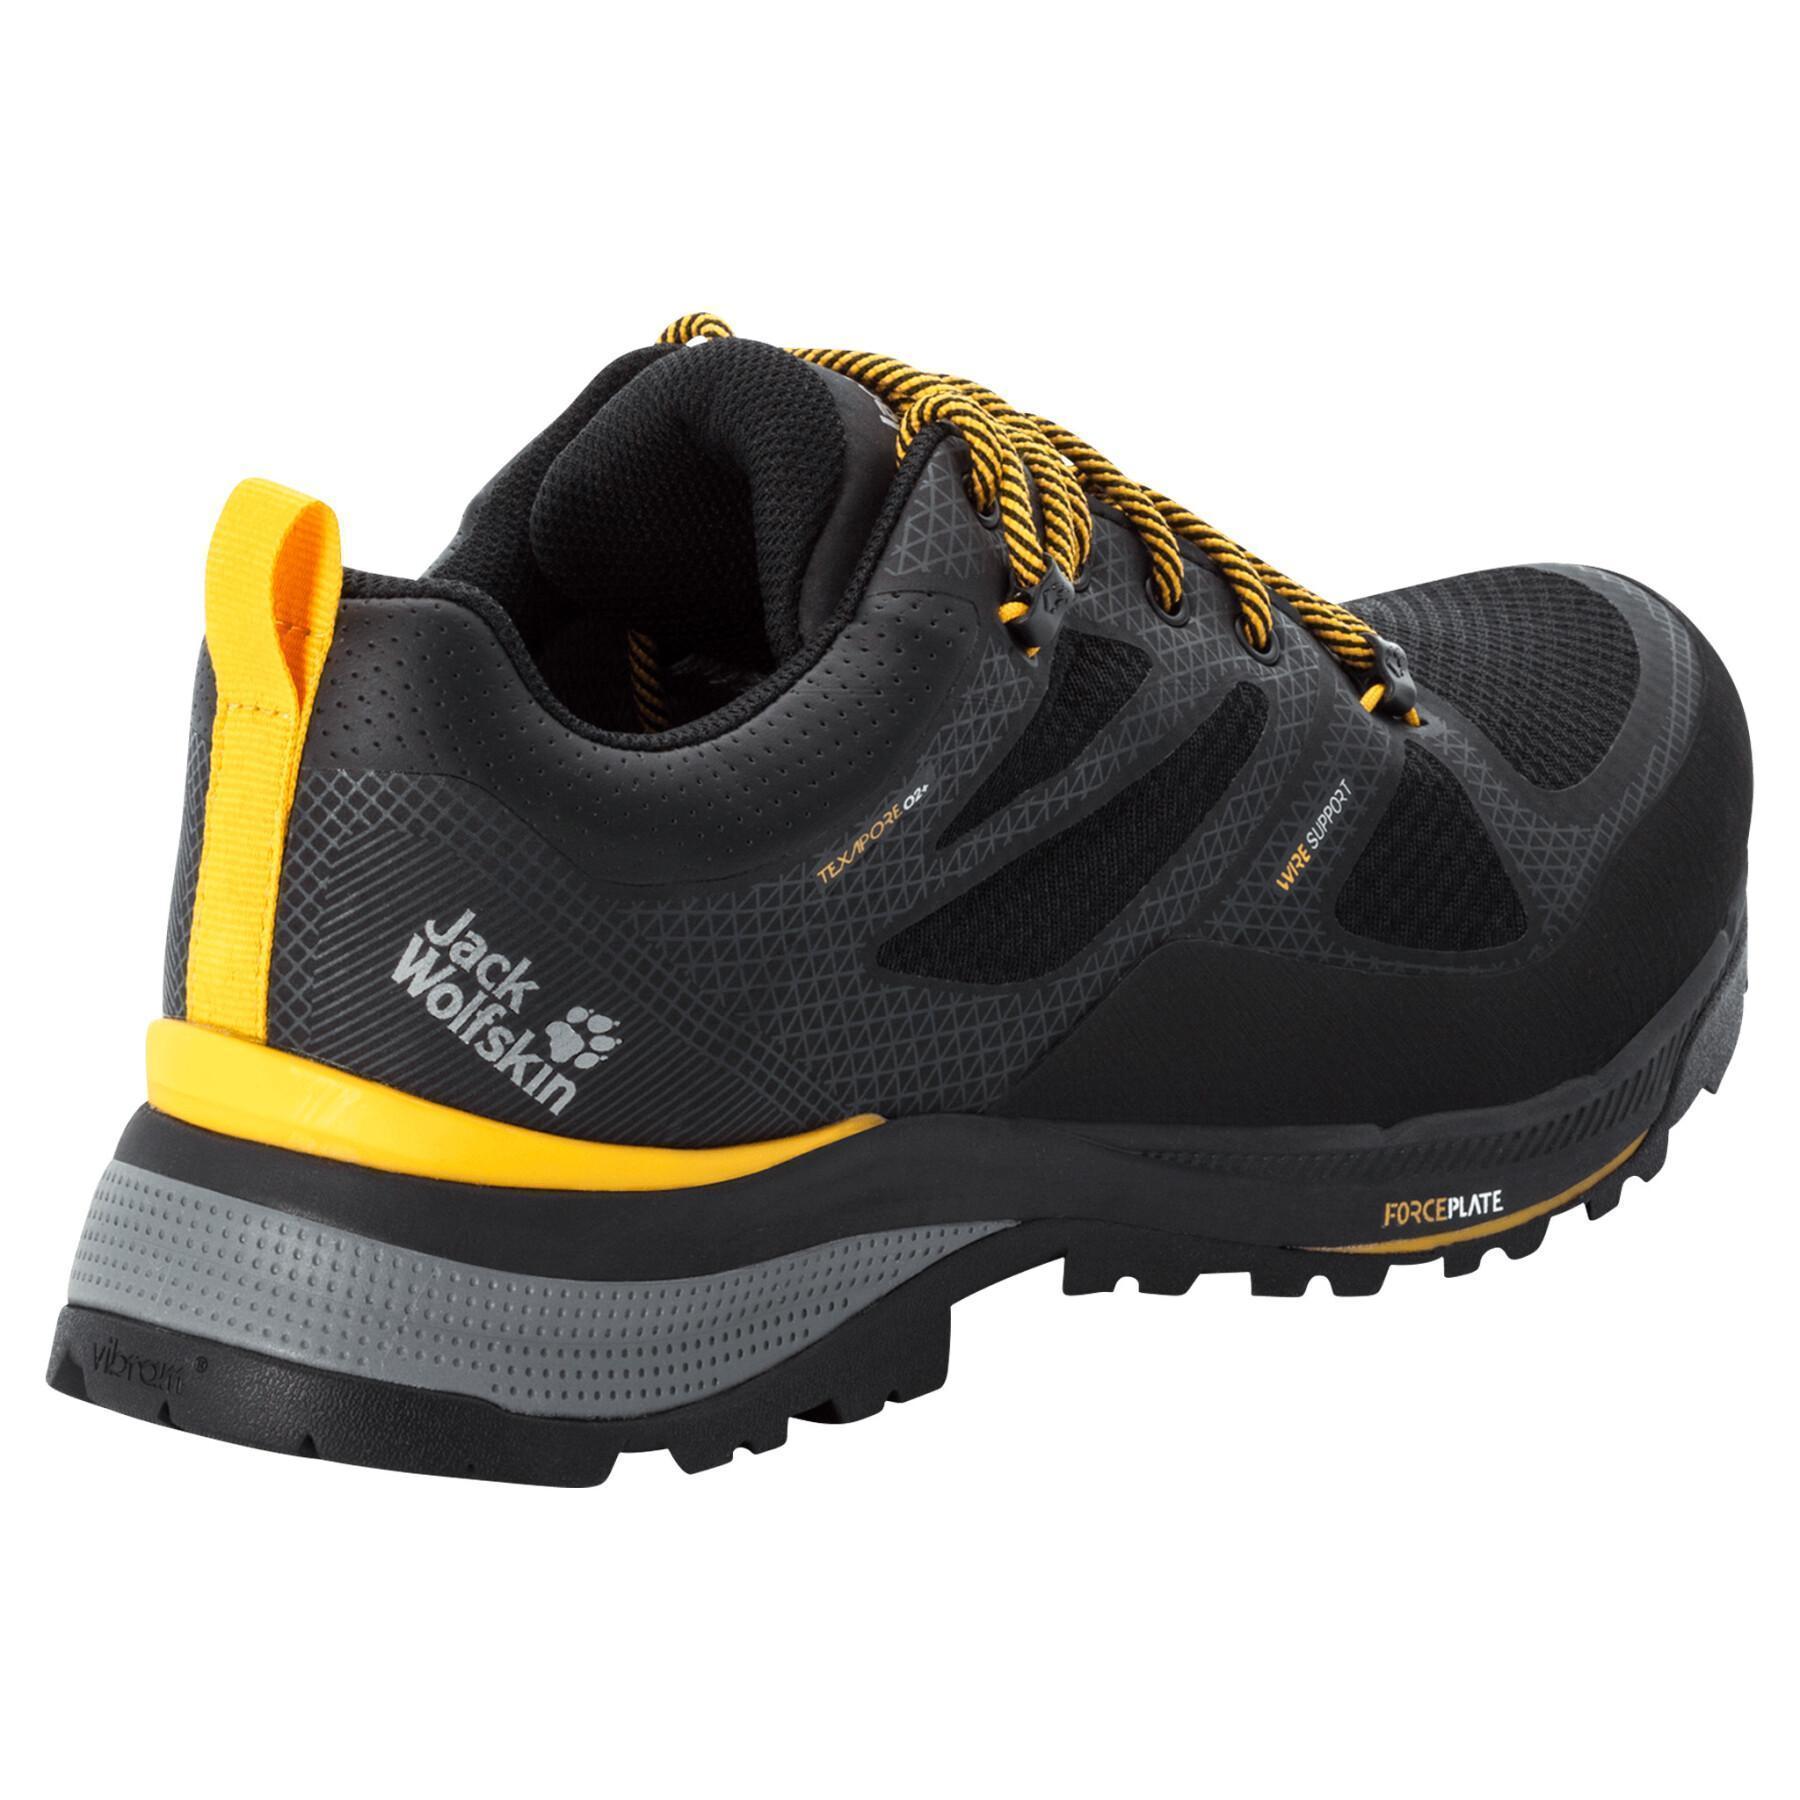 Low hiking shoes Jack Wolfskin force striker texapore